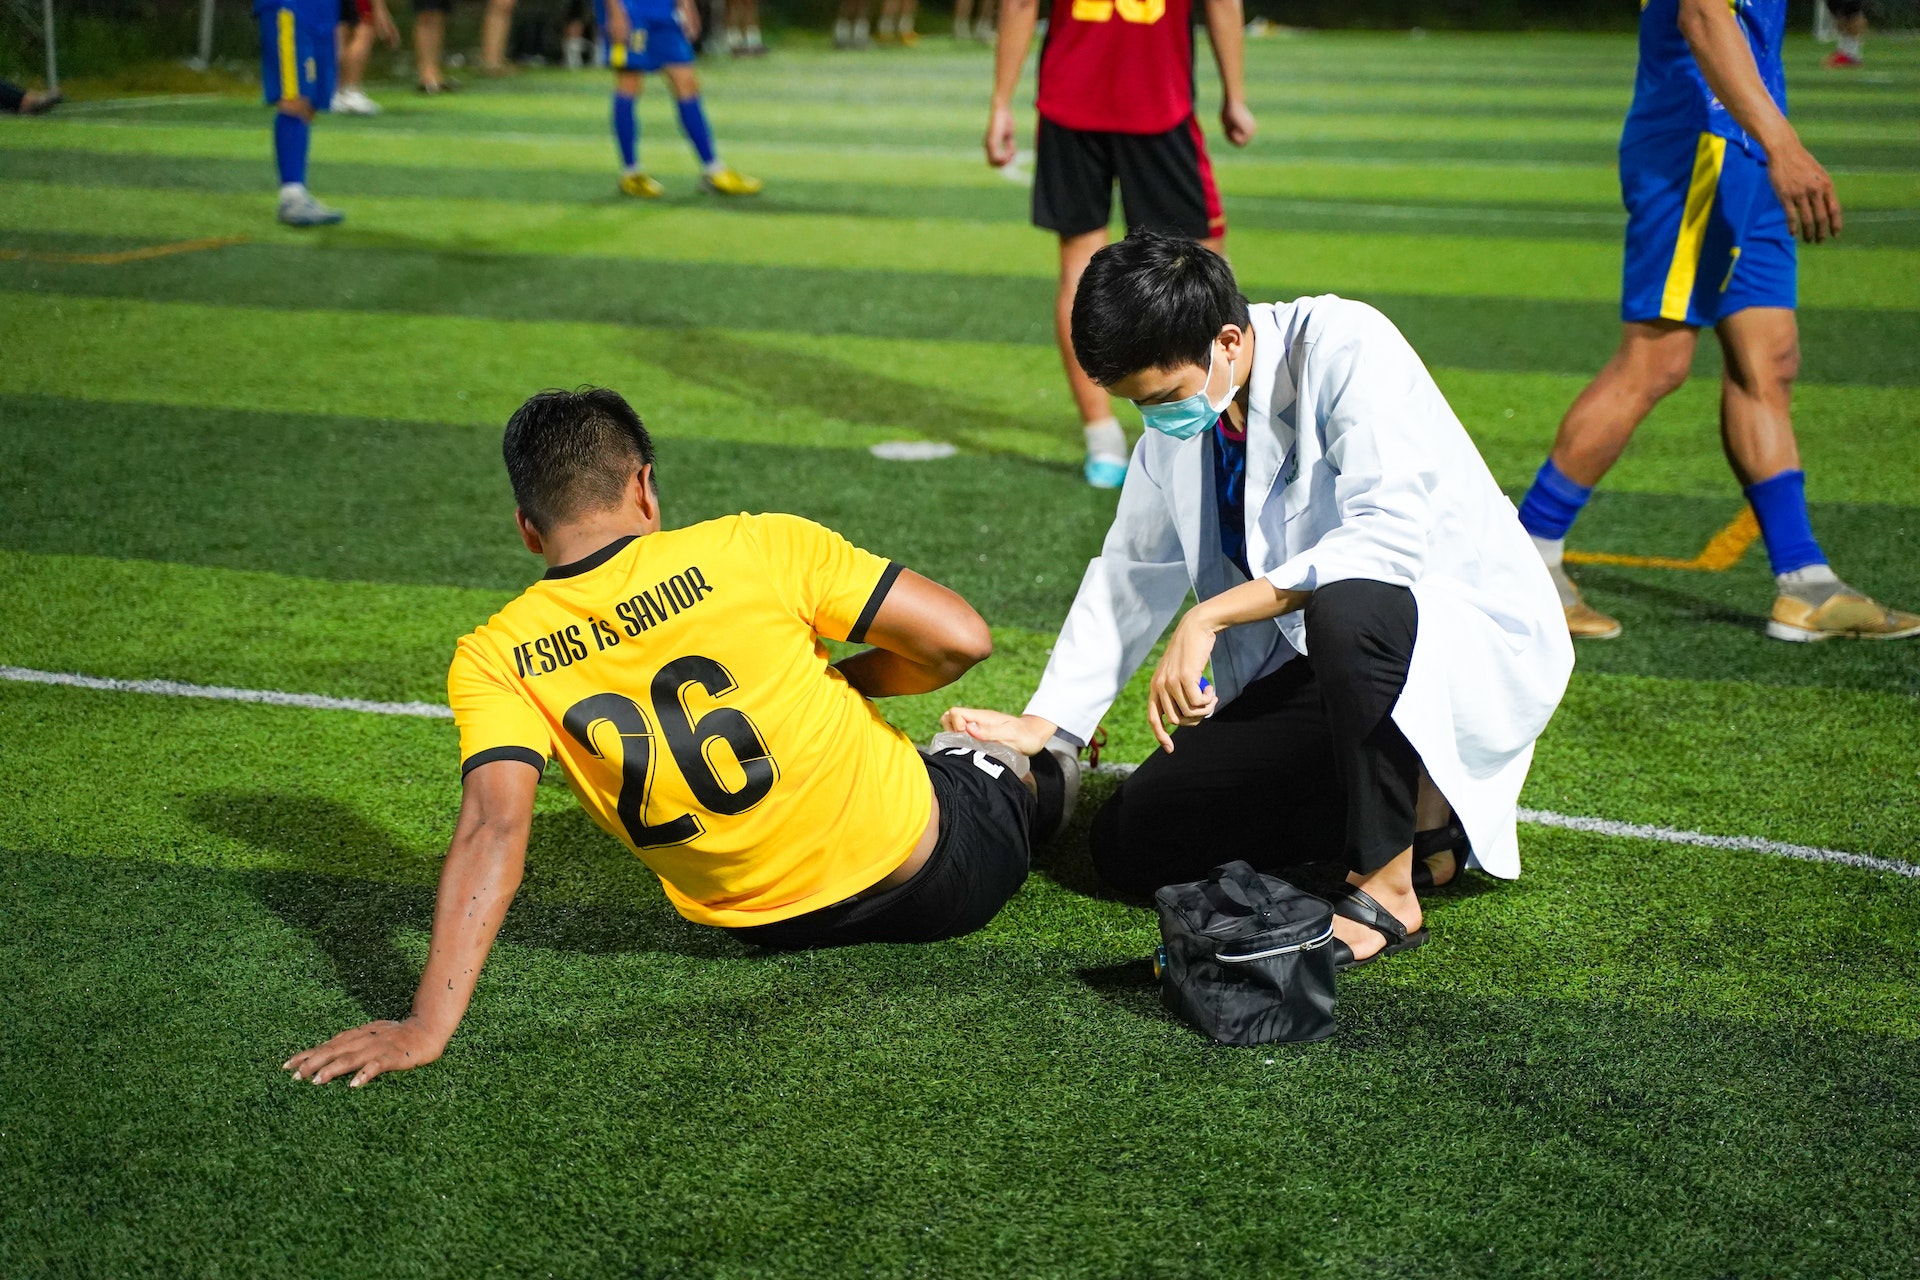 Photo by Quyn Phạm: https://www.pexels.com/photo/injured-soccer-player-with-a-doctor-13907447/